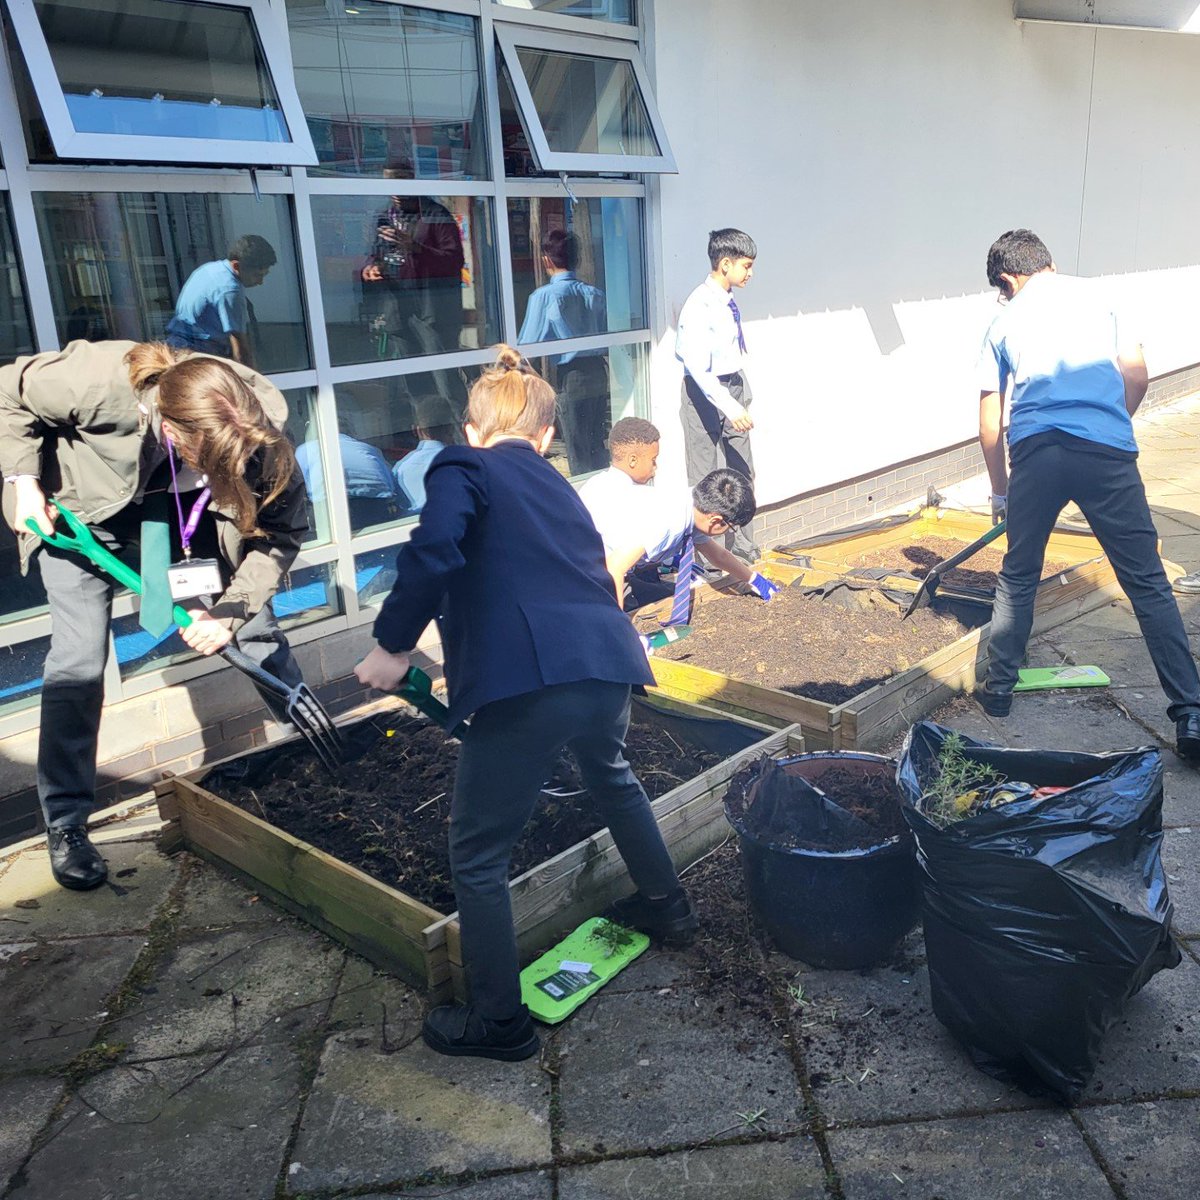 Some of our Arena students have been participating in the 'Grow With STEM' club, an enriching extracurricular activity. Within this dynamic environment, they planted flowers and vegetables in the beds alongside the saplings they had grown over the winter and spring.